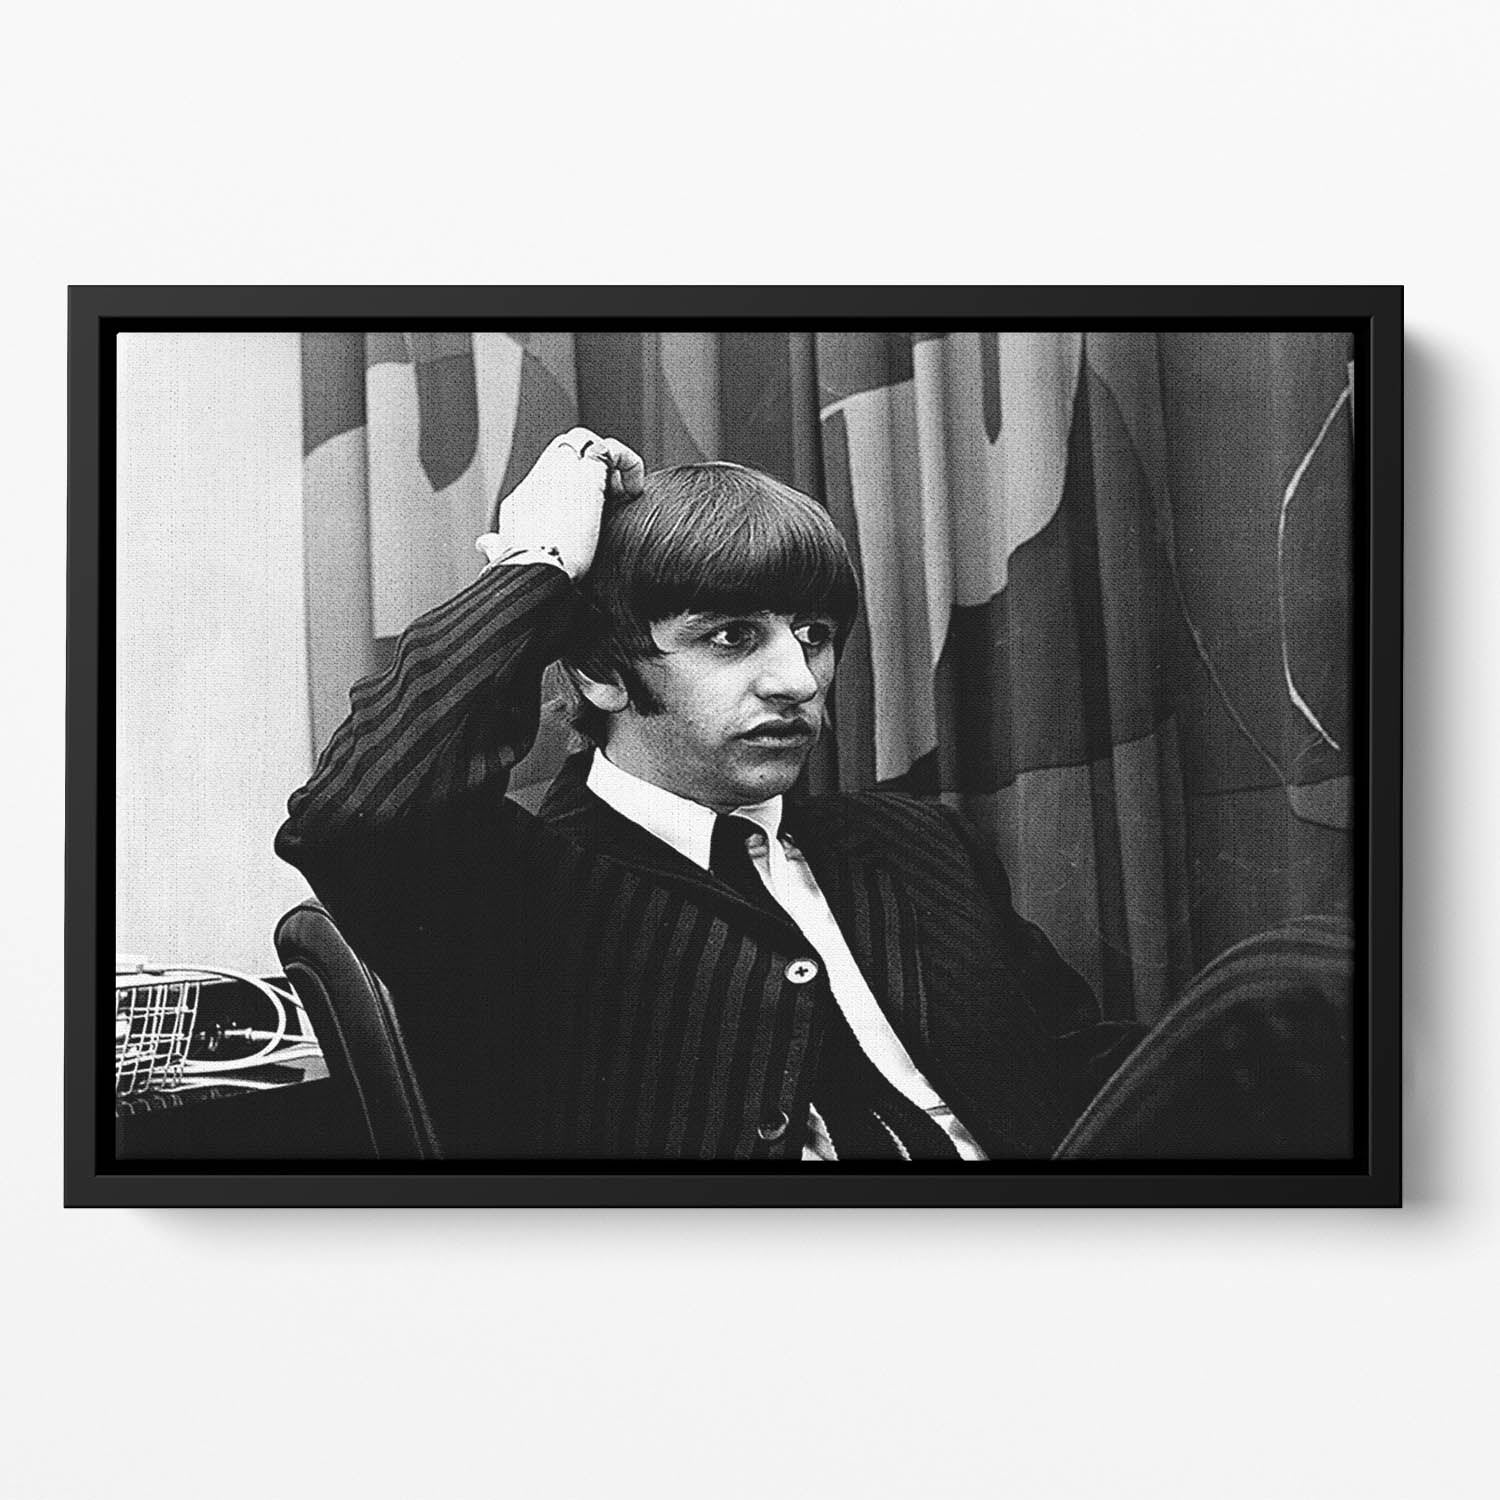 Ringo Starr at a press conference Floating Framed Canvas